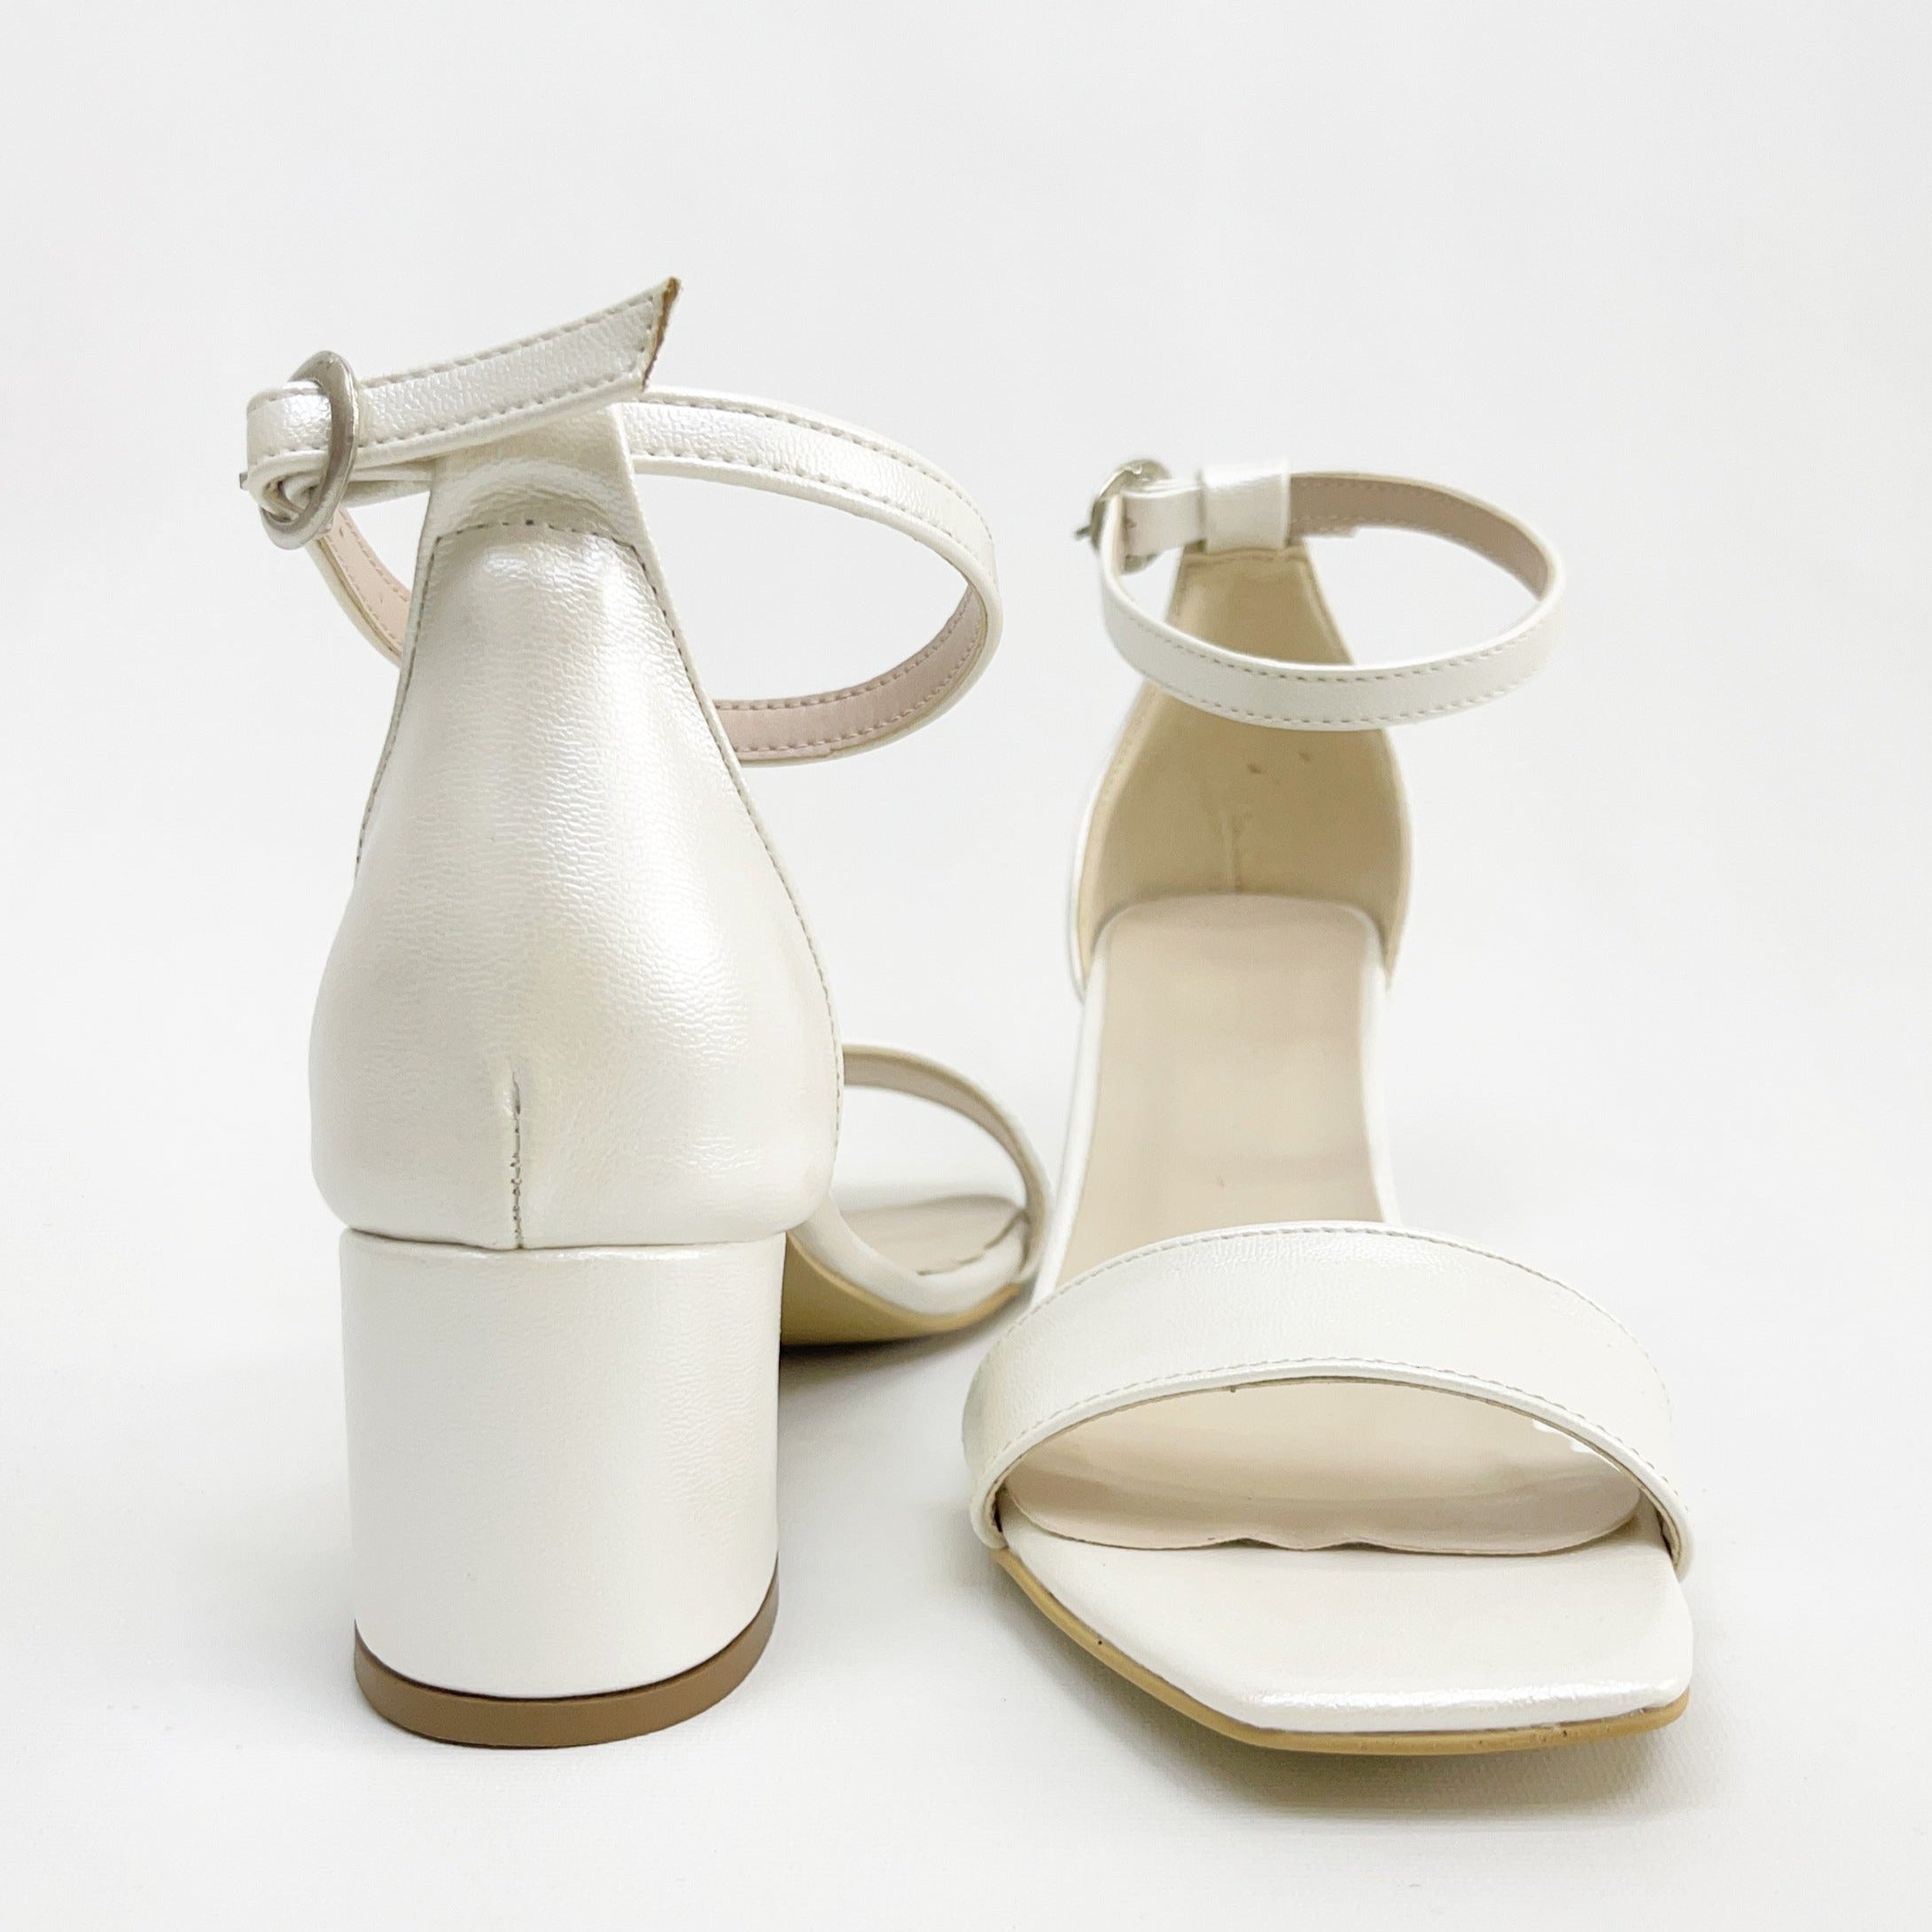 White ivory sandals, Ivory white sandals, Stylish white ivory shoes, Chic white sandals in ivory, Trendy white ivory footwear, Fashionable ivory white sandals, Elegant white ivory heels, Classic ivory white sandals, Comfortable white ivory shoes, White ivory sandals for women.